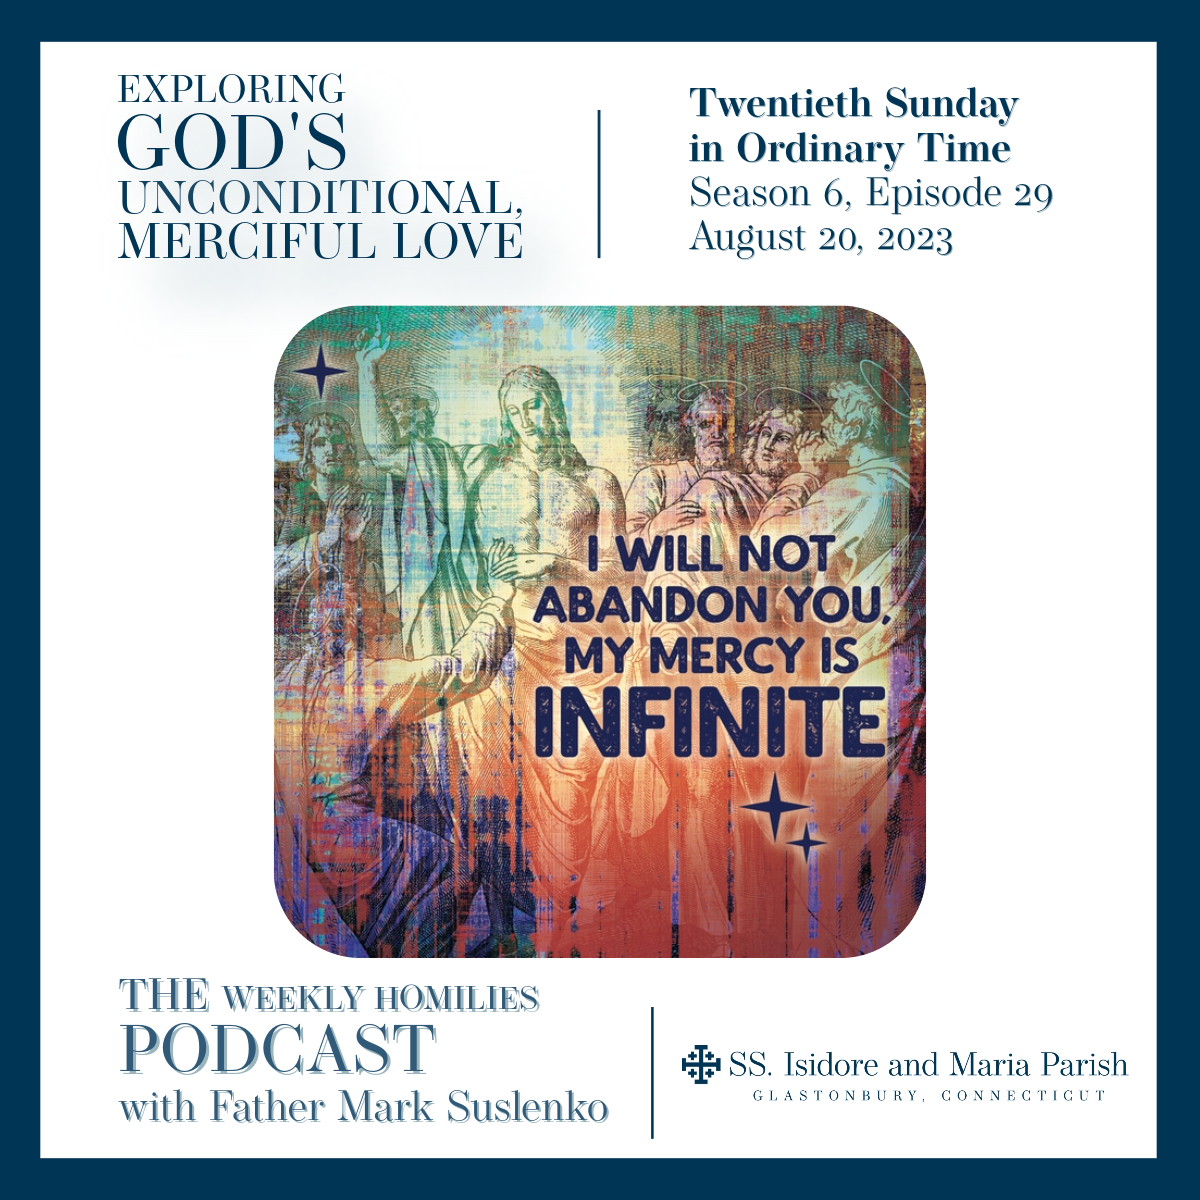 PODCAST: Exploring God’s Unconditional, Merciful Love